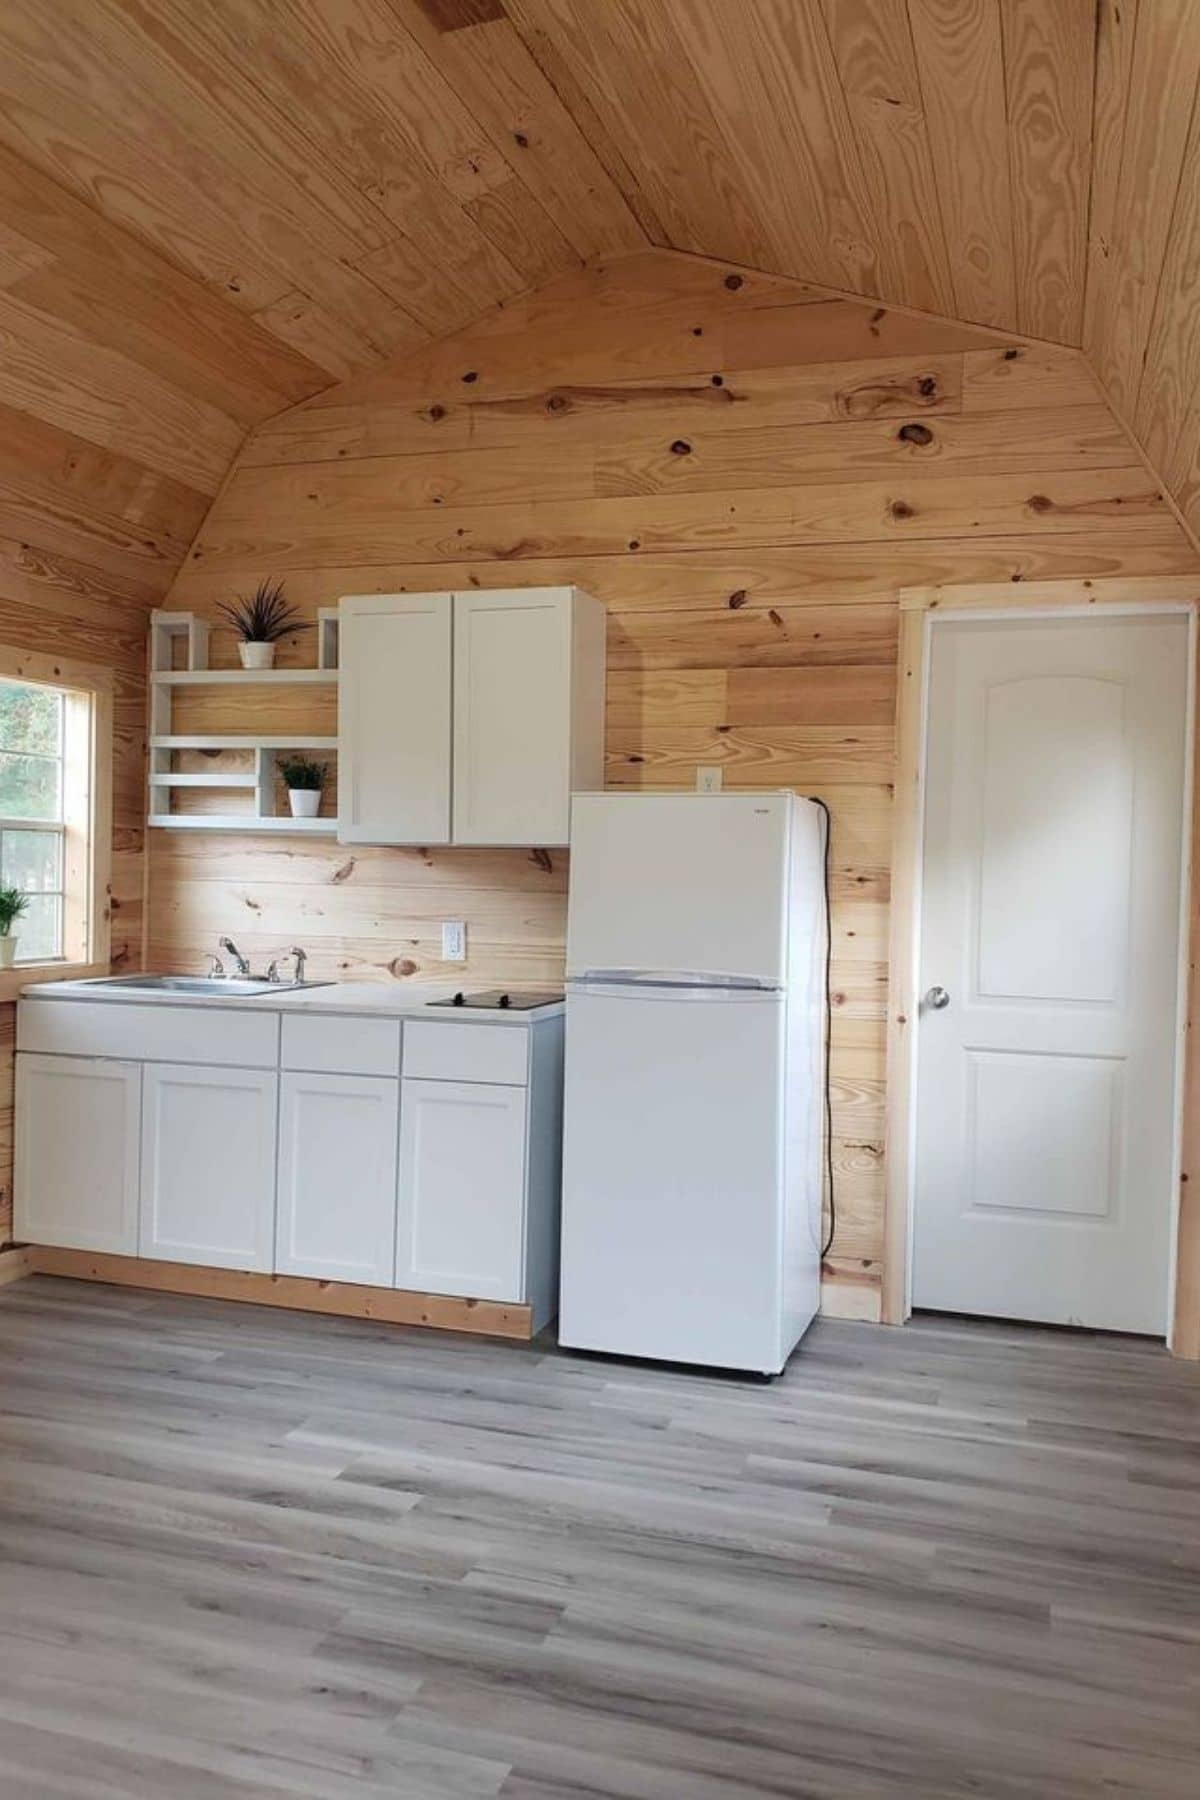 white cabinets and refrigerator against wood wall next to white door